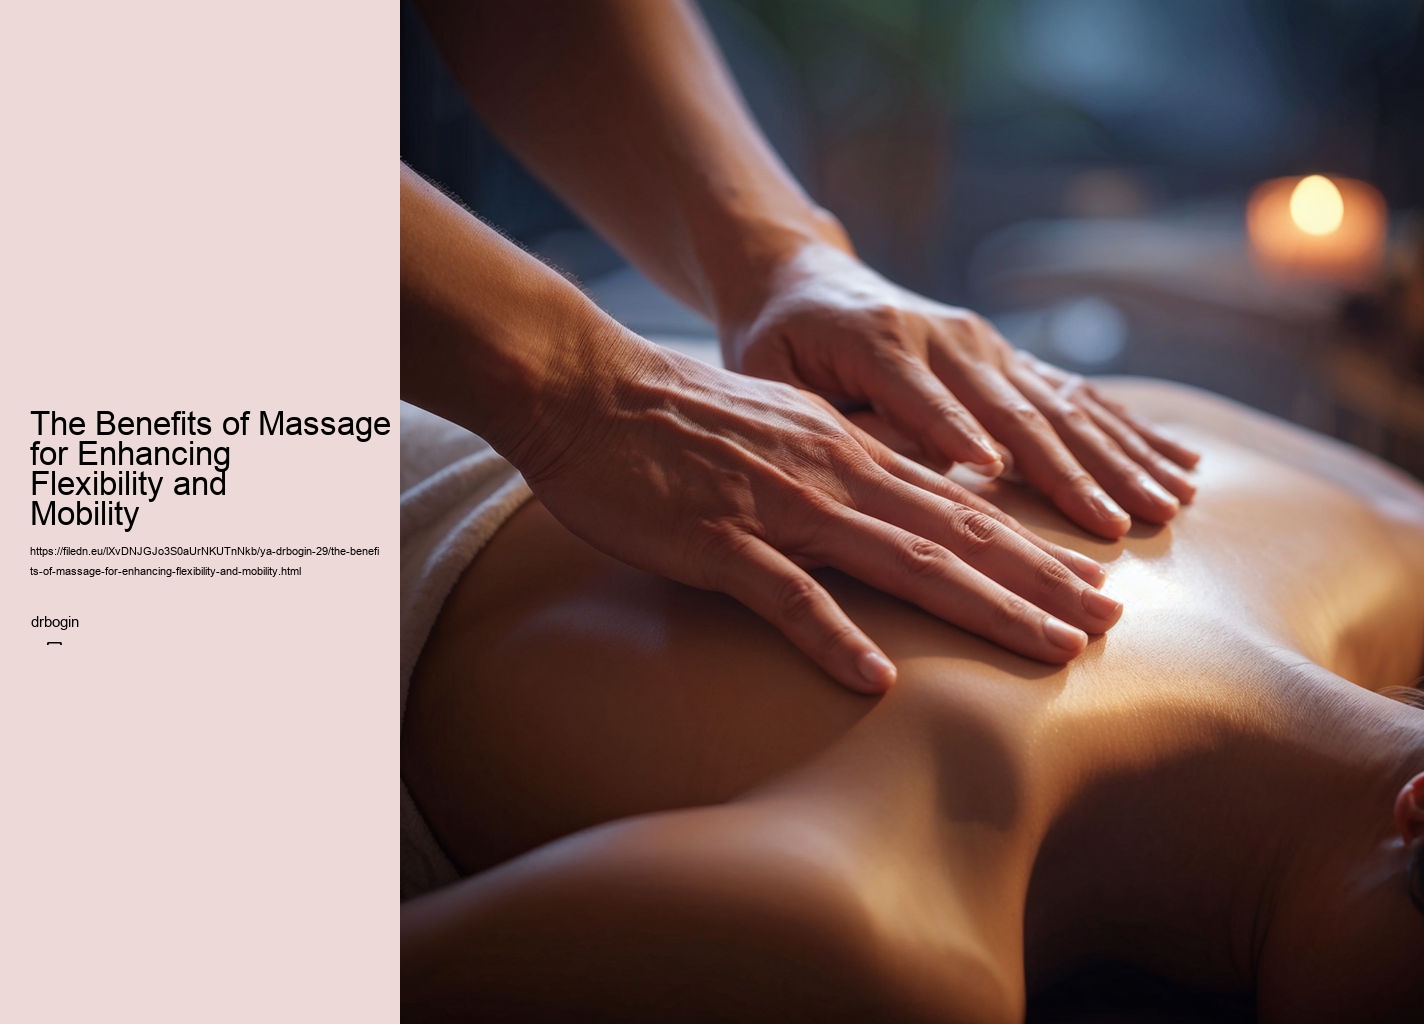 The Benefits of Massage for Enhancing Flexibility and Mobility